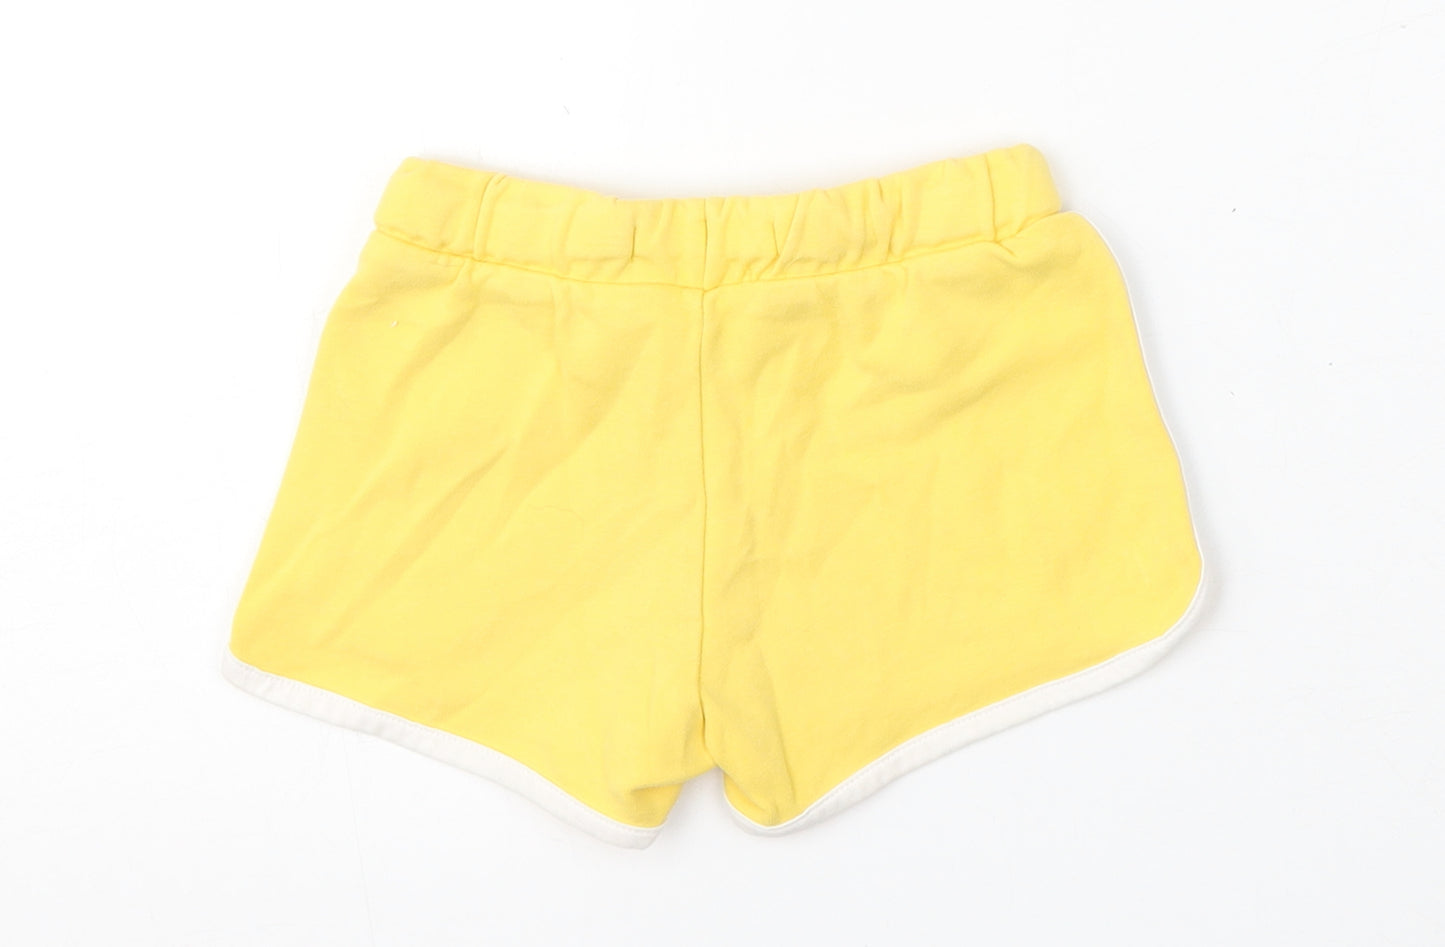 Marks and Spencer Girls Yellow  Cotton Sweat Shorts Size 2-3 Years  Regular